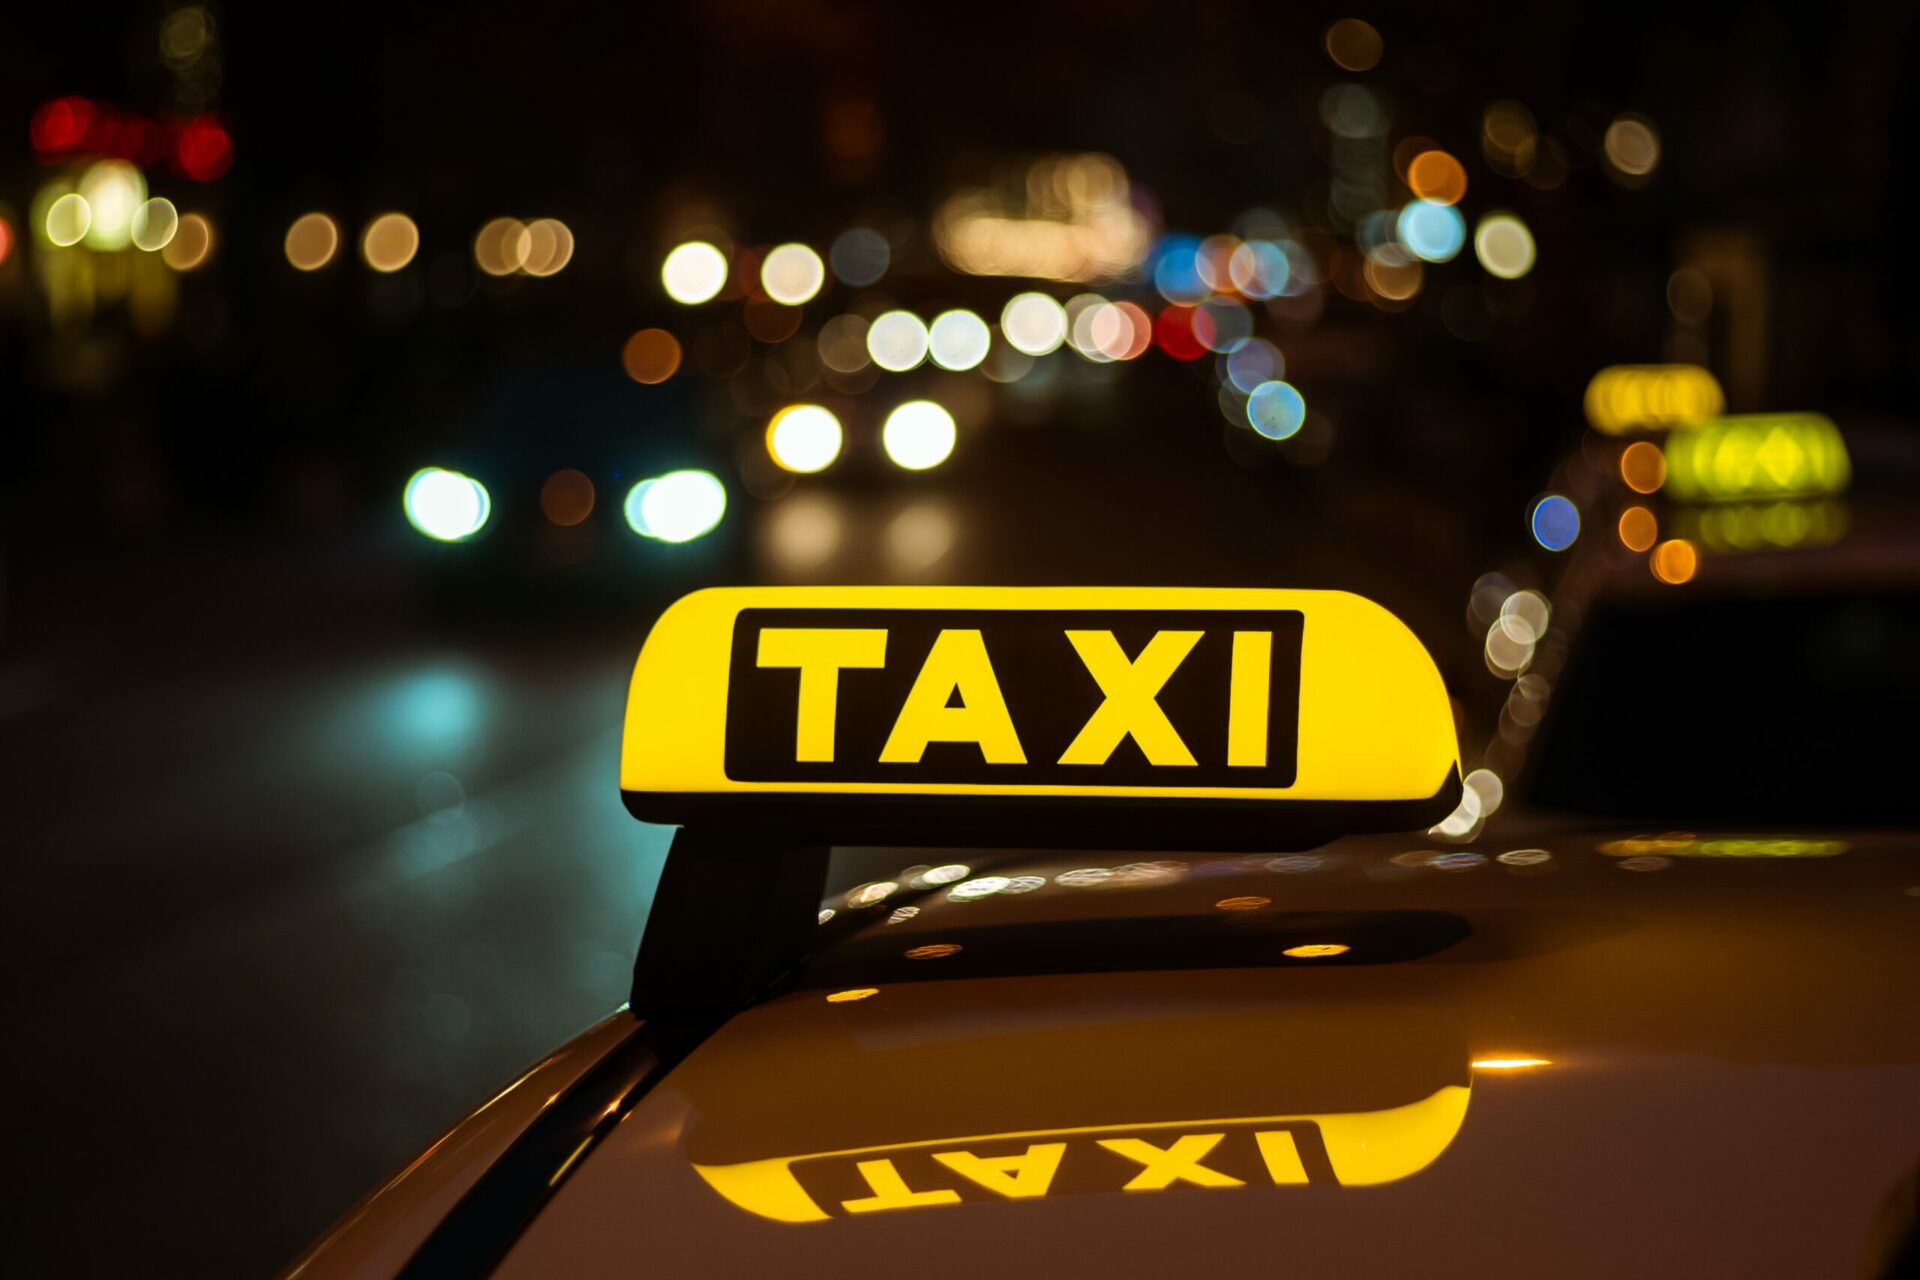 A yellow and black sign of Taxi placed on top of a car at night